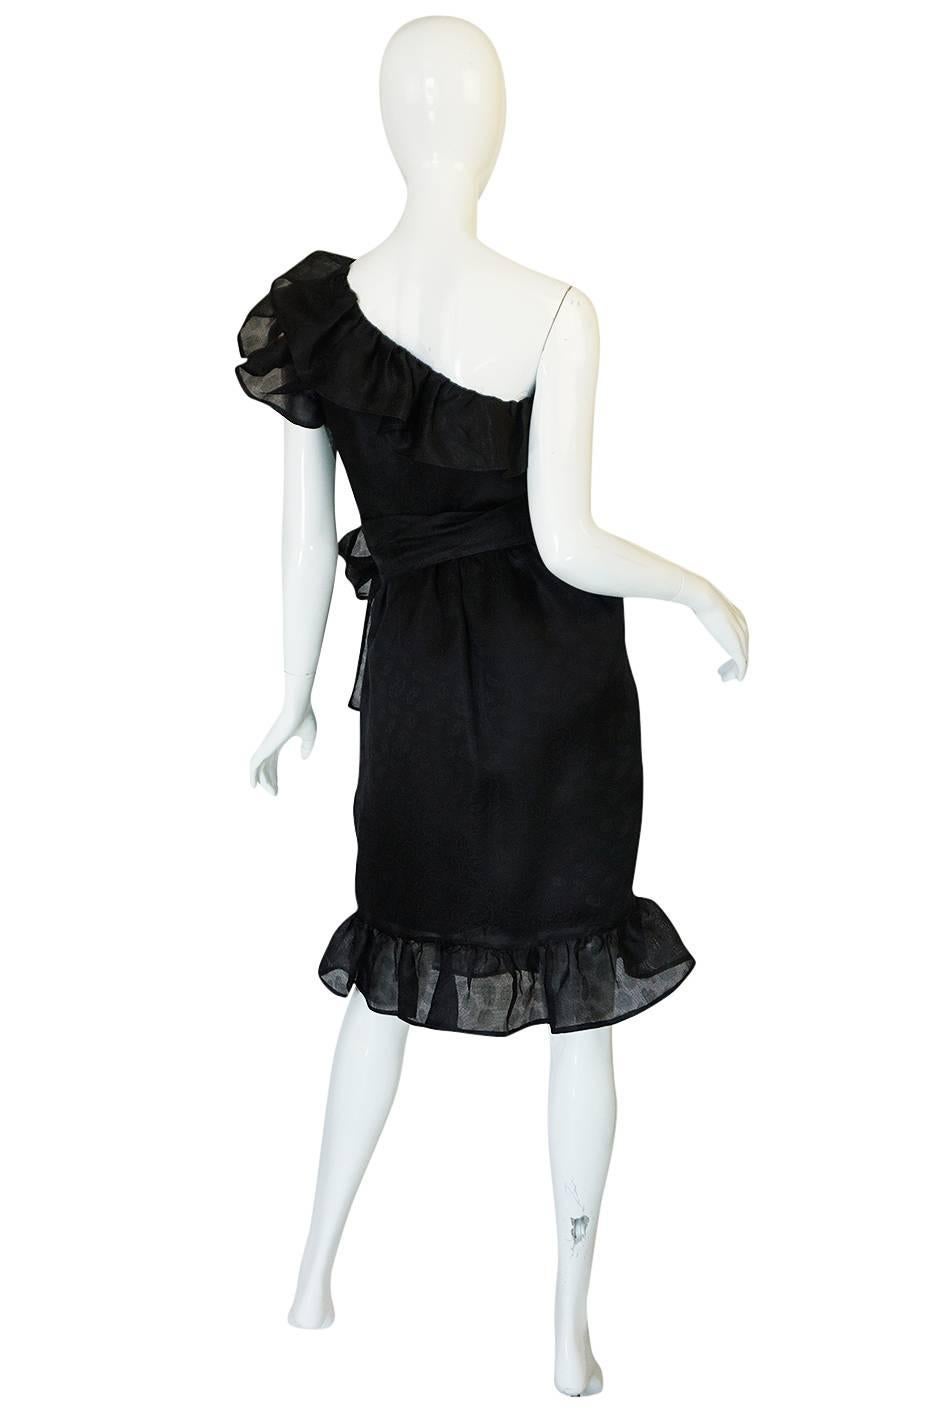 This little black dress is a beauty. It is just exceptional and the more details you start to notice the more you love it. The design is a one shoulder, fitted silhouette that is all tiered ruffles that highlight that design. The bodice is fitted to